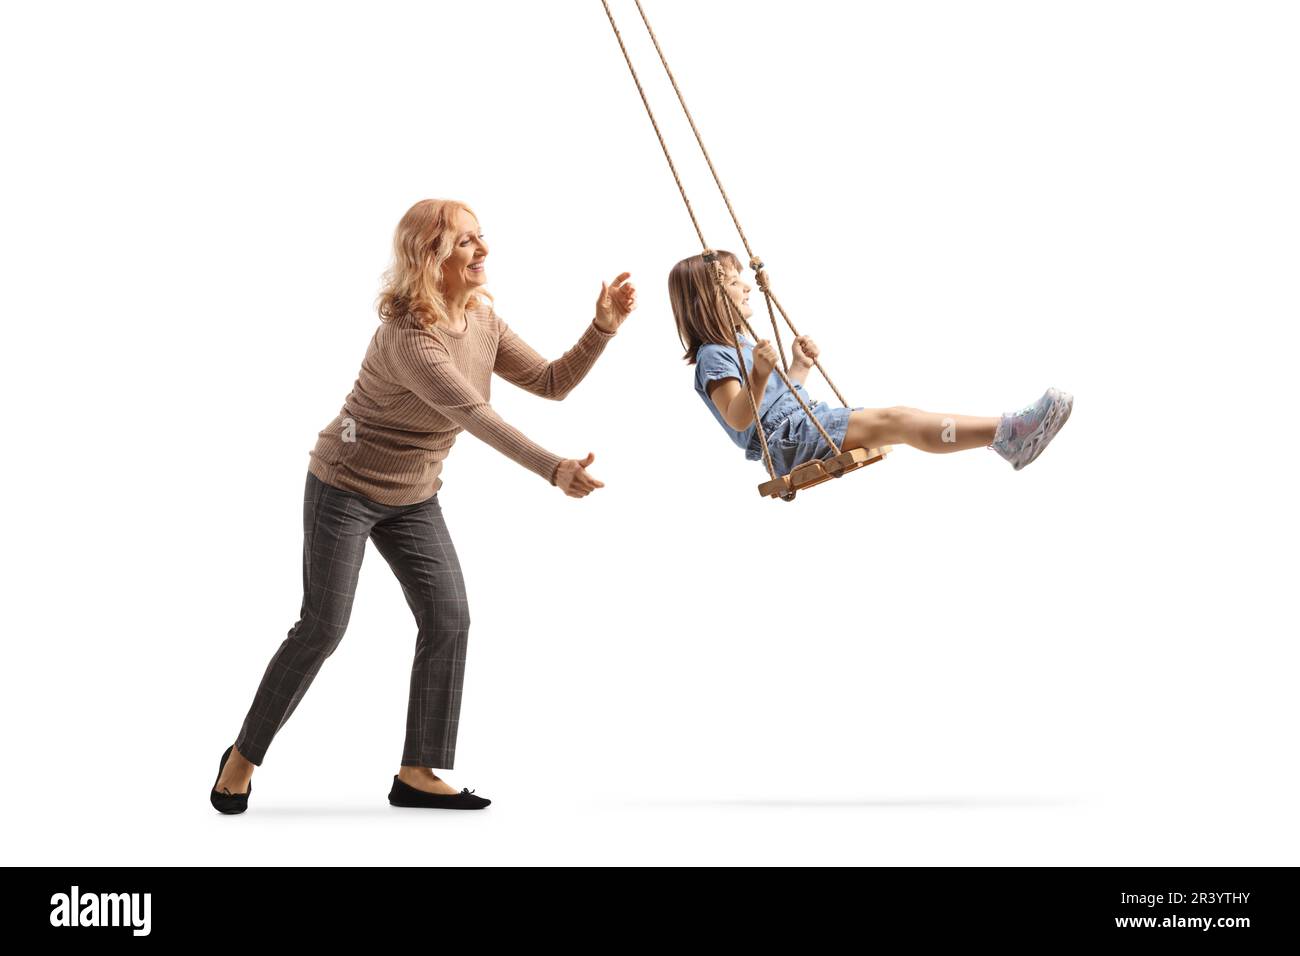 Woman pushing a little girl on a swing isolated on white background Stock Photo